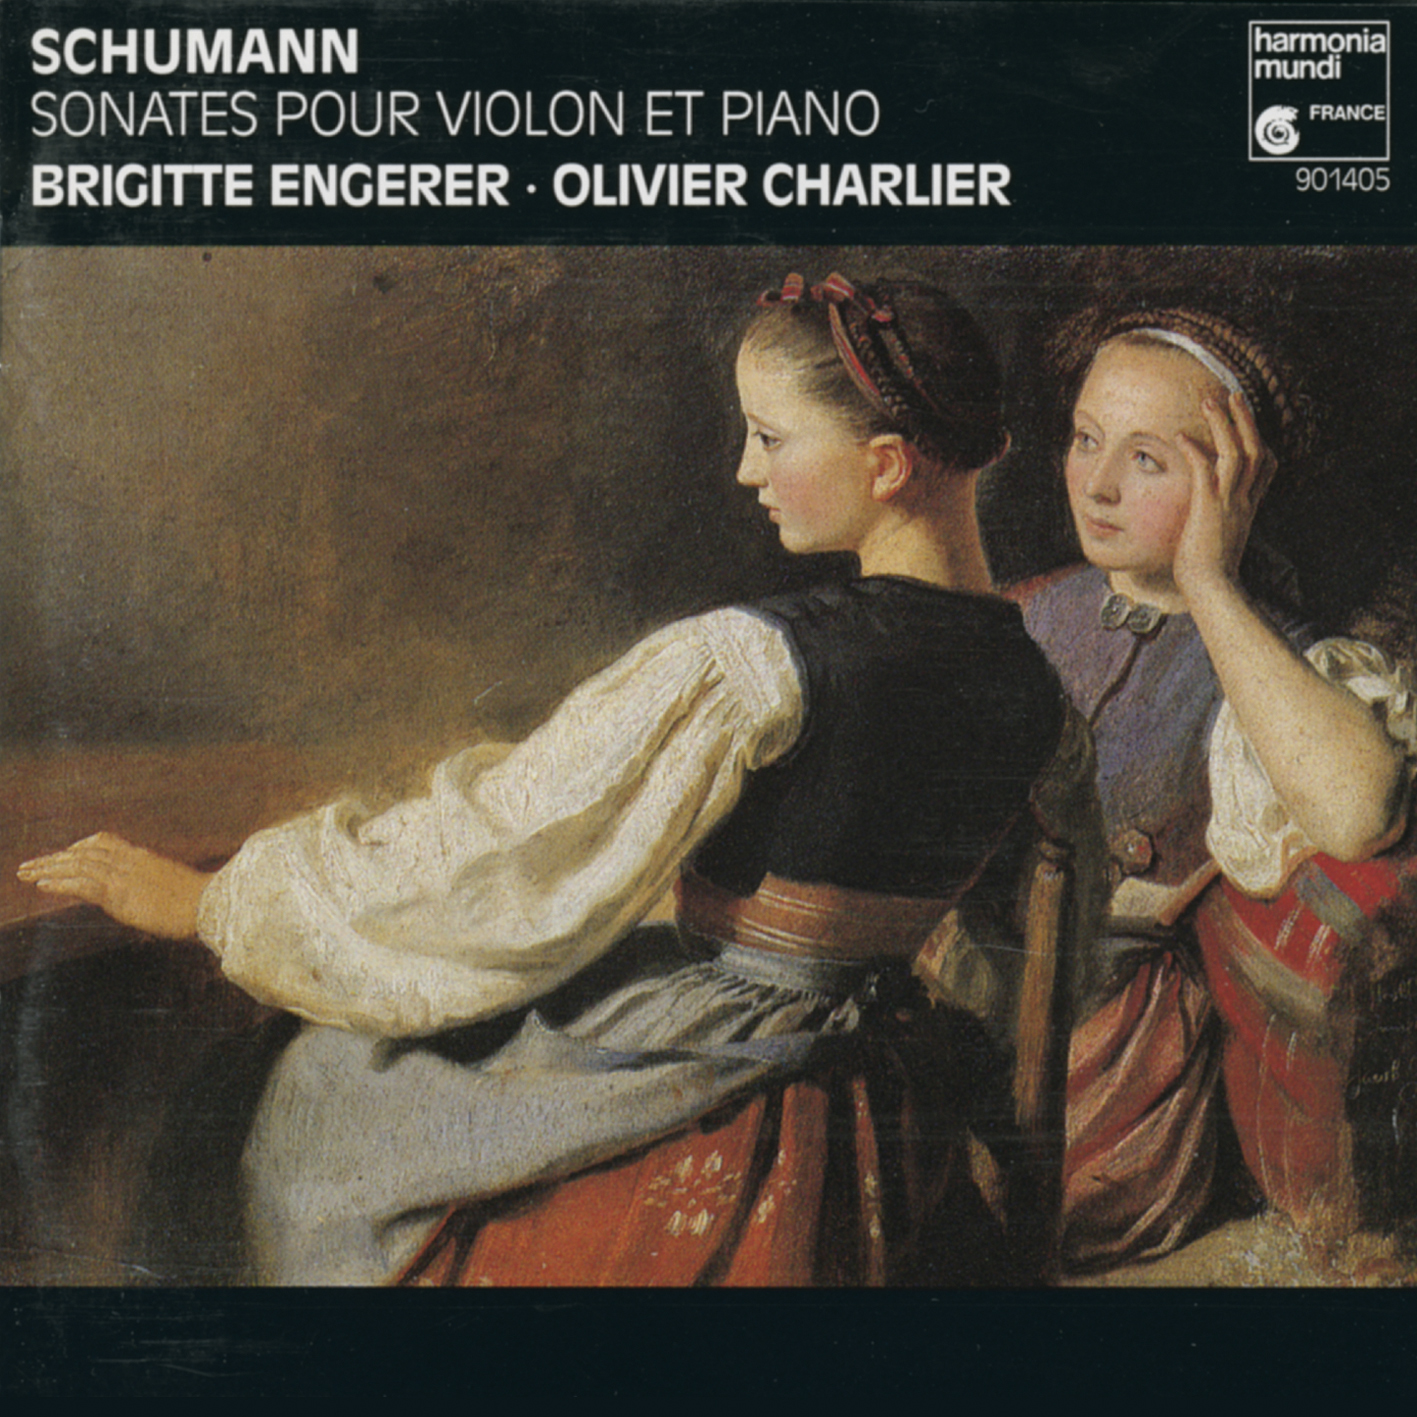 Sonata for violin & piano No. 2 in D Minor, Op. 121: III. Leise, einfach